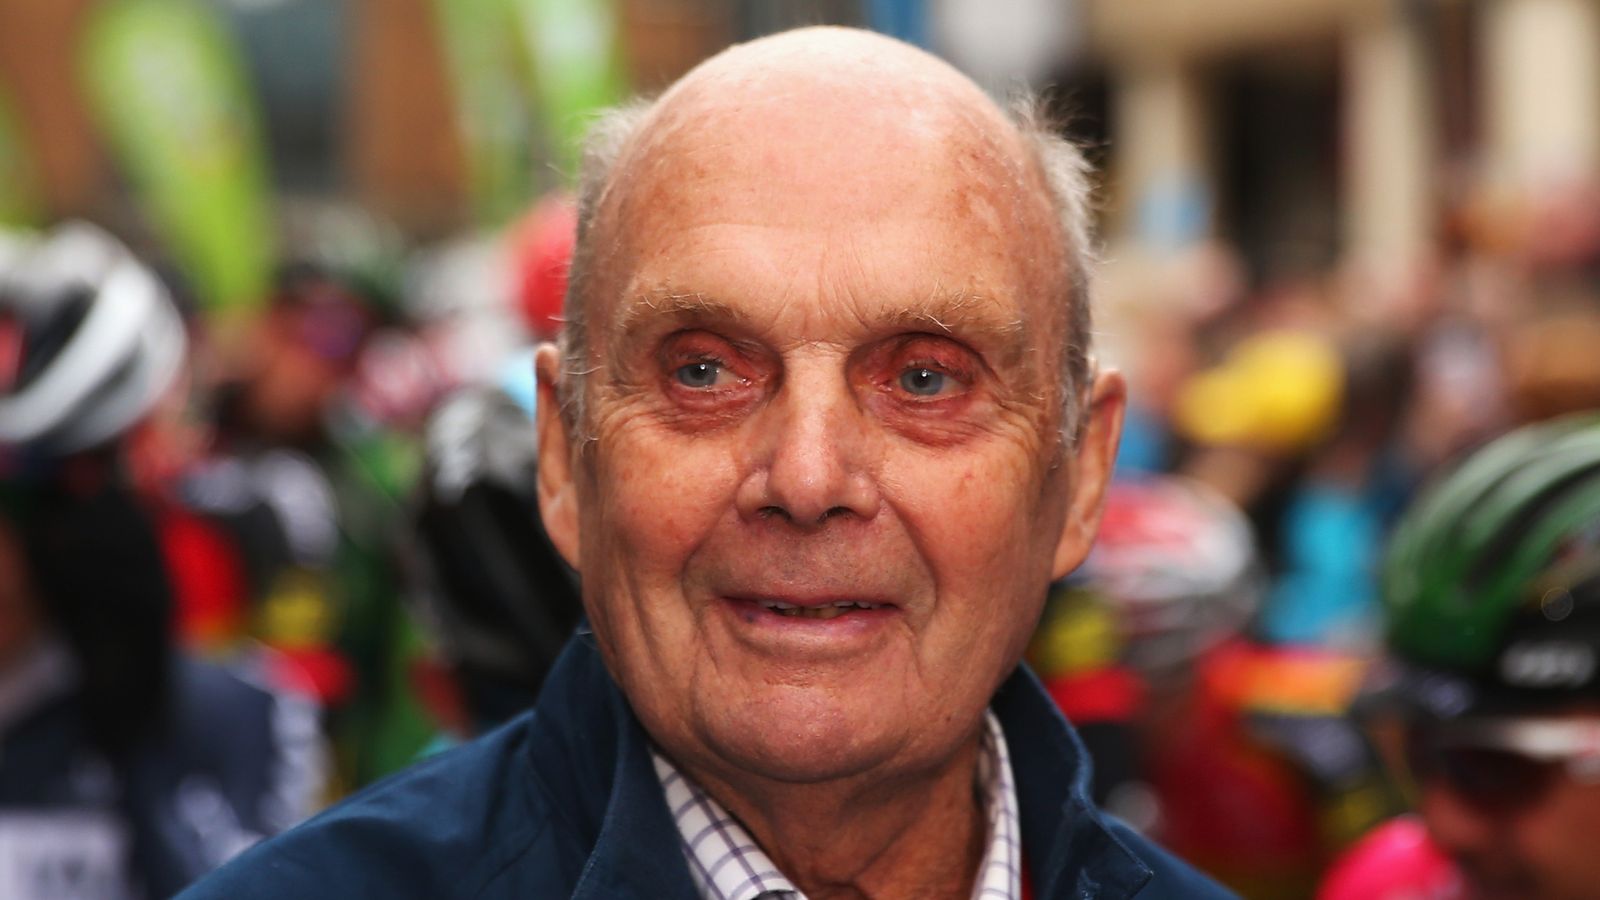 tour-de-france-brian-robinson-the-first-briton-to-both-compete-and-win-a-stage-has-died-aged-91